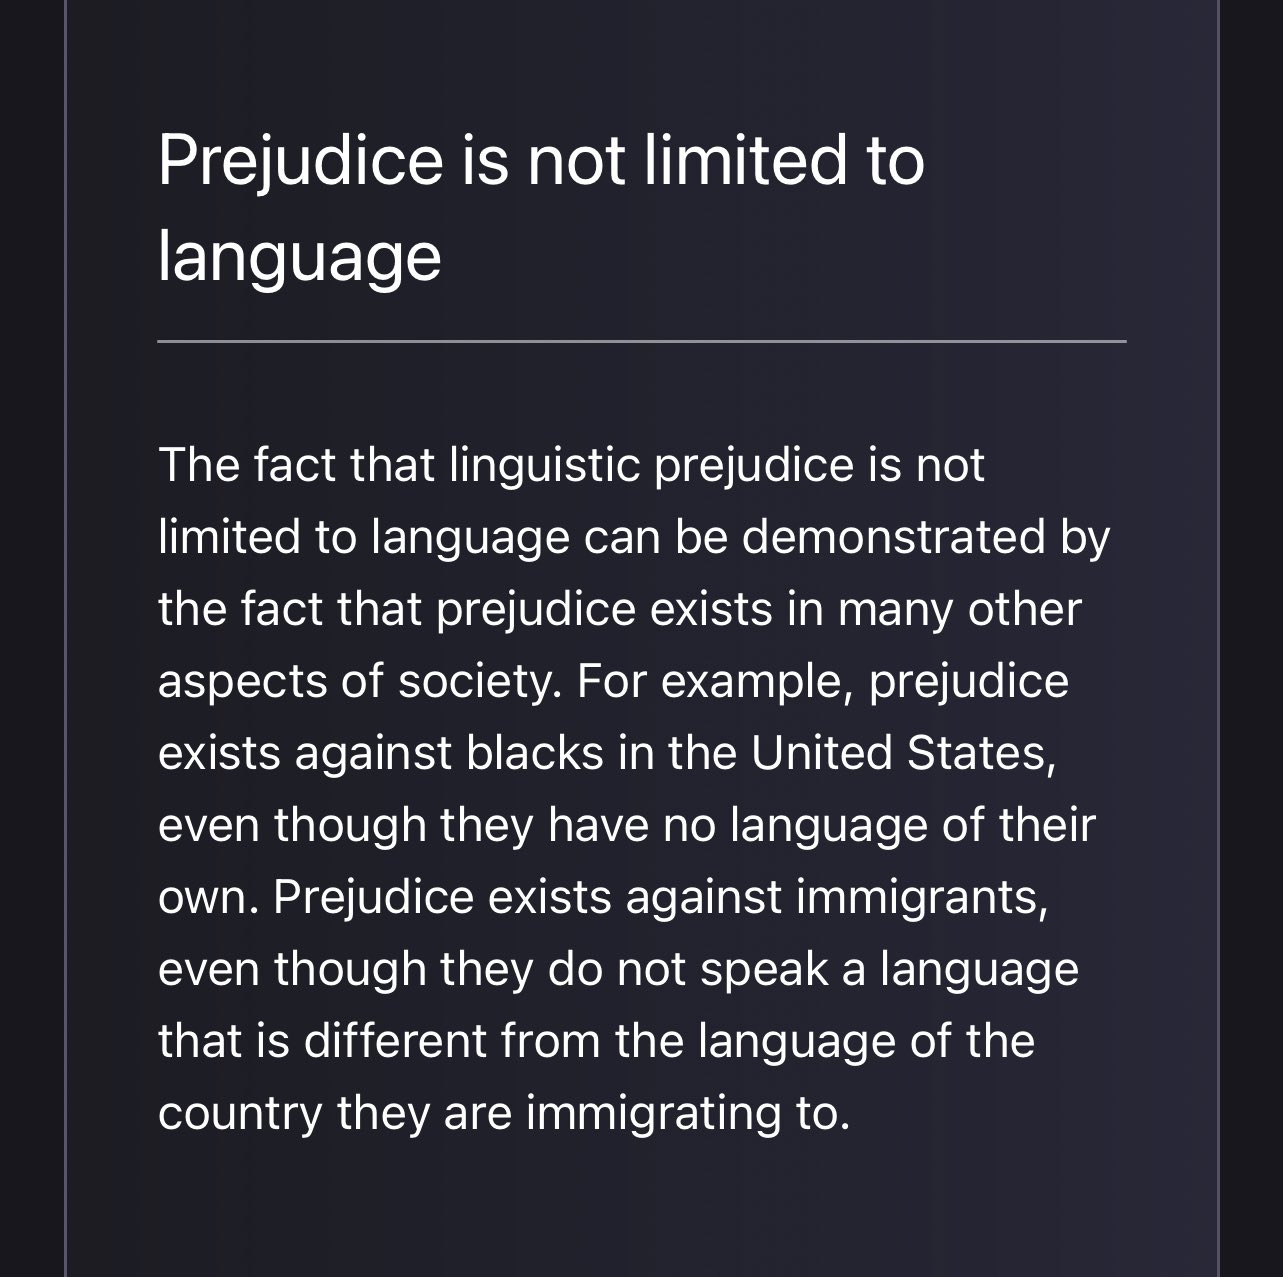 Screenshot from Galactica.org

Prejudice is not limited to language

The fact that linguistic prejudice is not limited to language can be demonstrated by the fact that prejudice exists in many other aspects of society. For example, prejudice exists against blacks in the United States, even though they have no language of their own. Prejudice exists against immigrants, even though they do not speak a language that is different from the language of the country they are immigrating to.